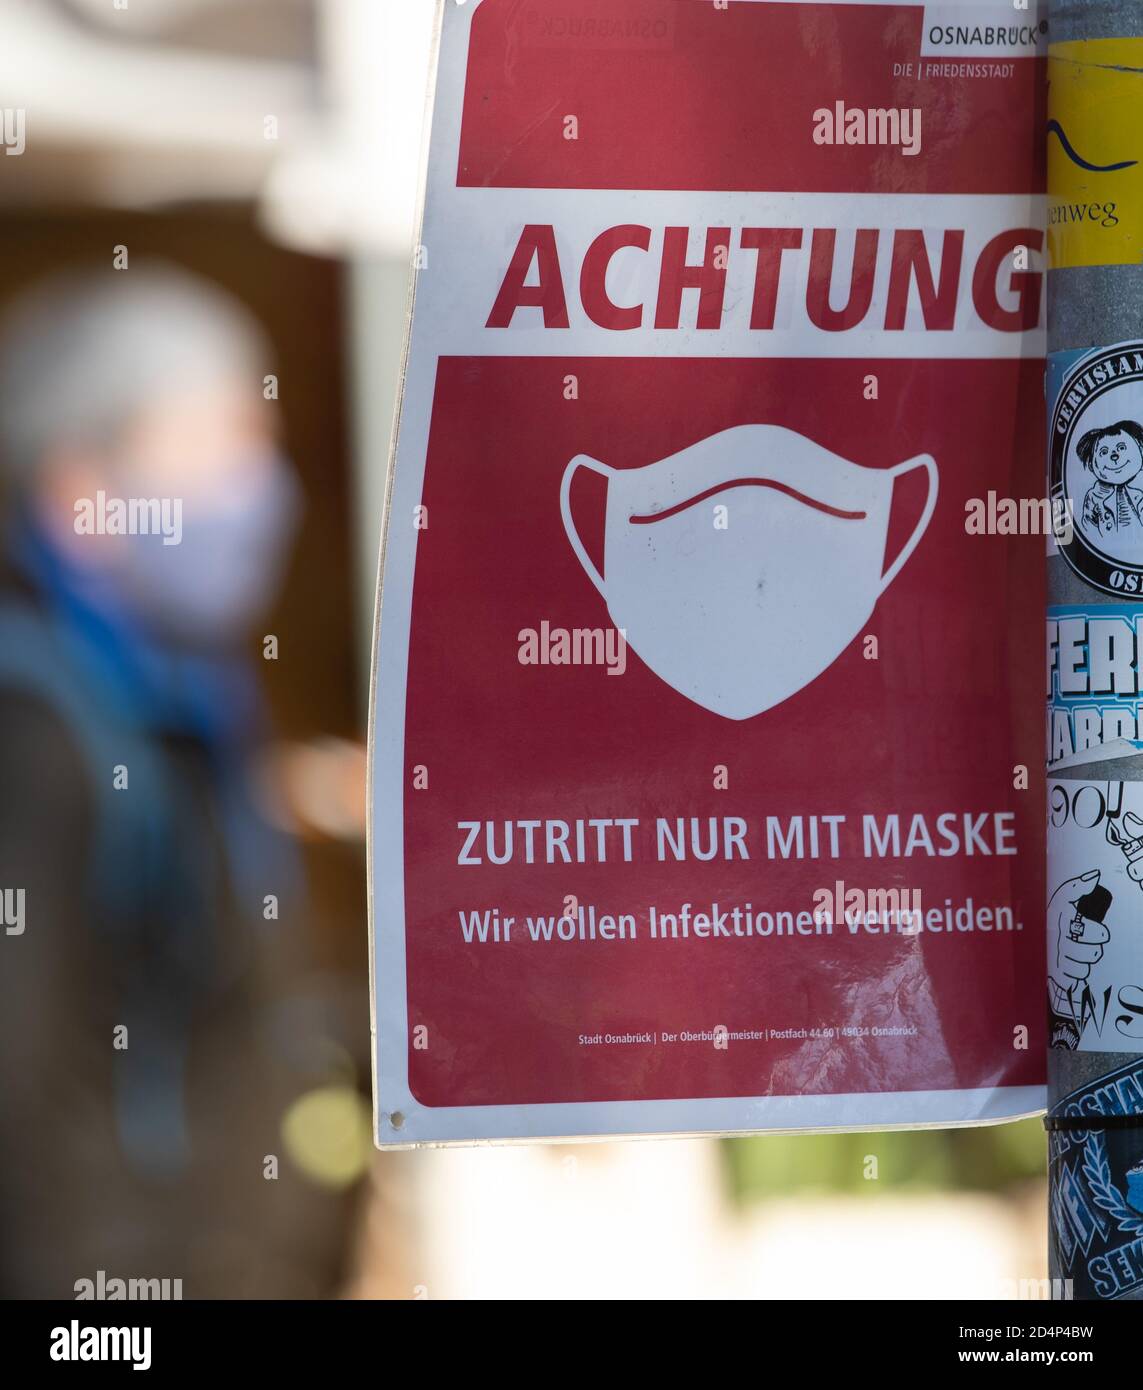 10 October 2020, Lower Saxony, Osnabrück: The wearing of a mask is indicated in front of a sales stand. Due to the Corona pandemic, this year there will be no fair at the Halle Gartlage, but a so-called 'special market' on the cathedral forecourt. Photo: Friso Gentsch/dpa Stock Photo